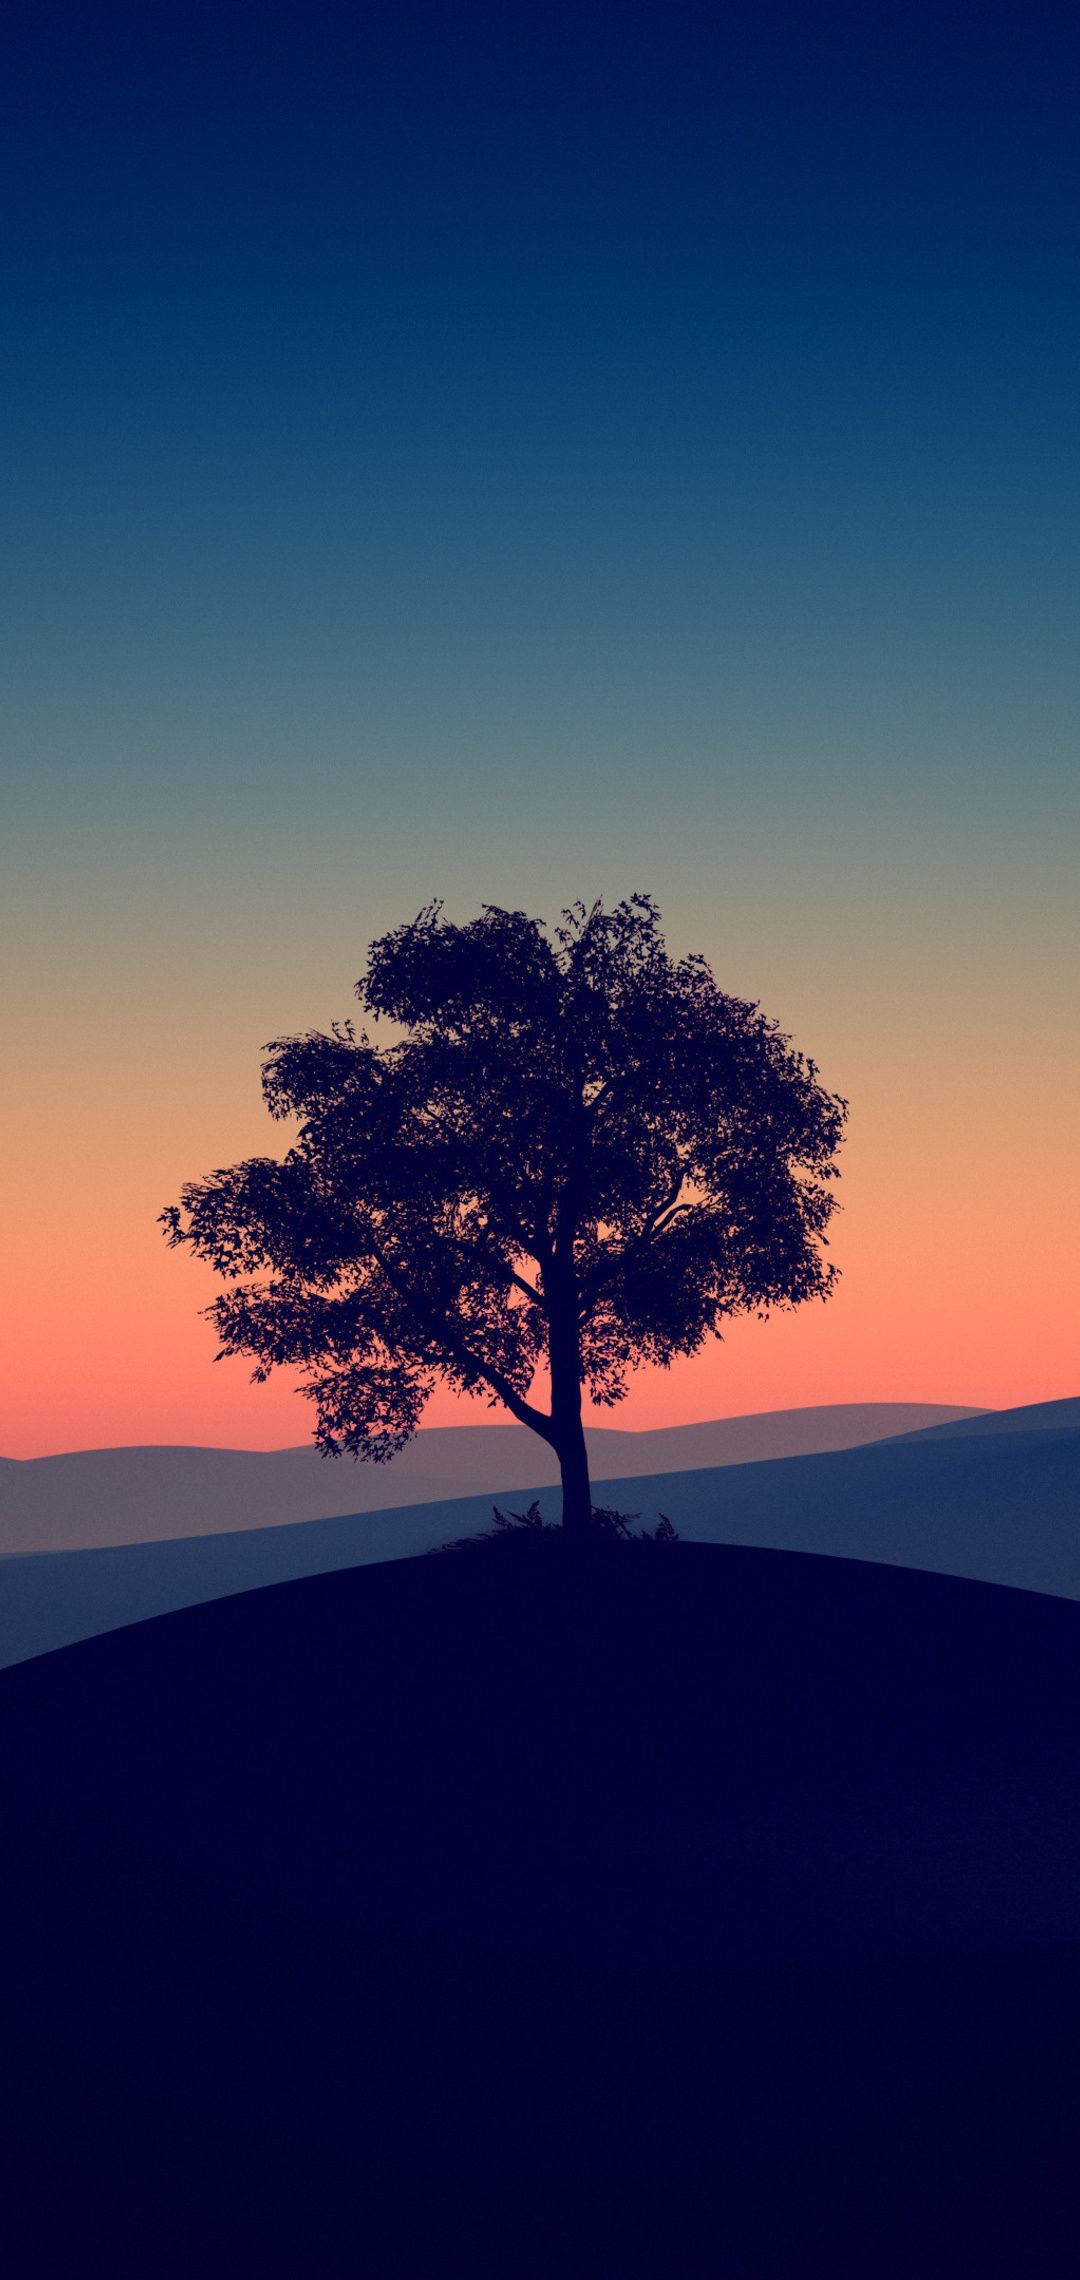 A Lone Tree on a Dark evening wallpaper in comments